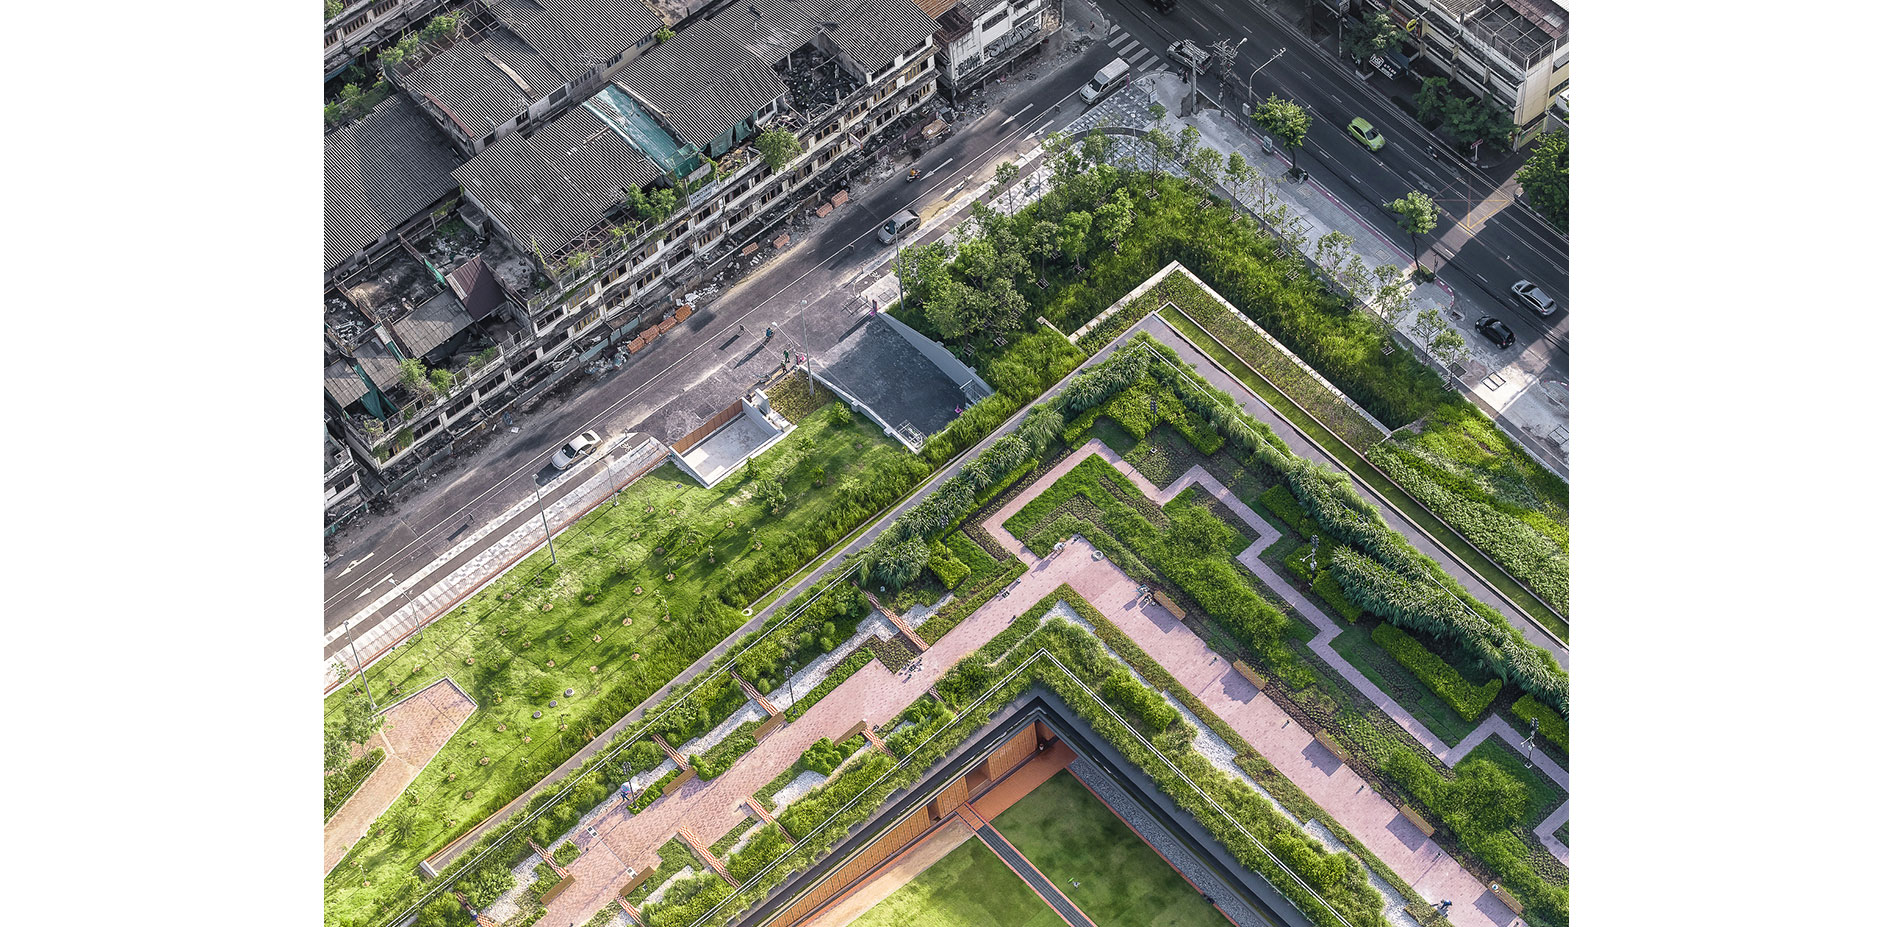 The biggest green roof in Thailand